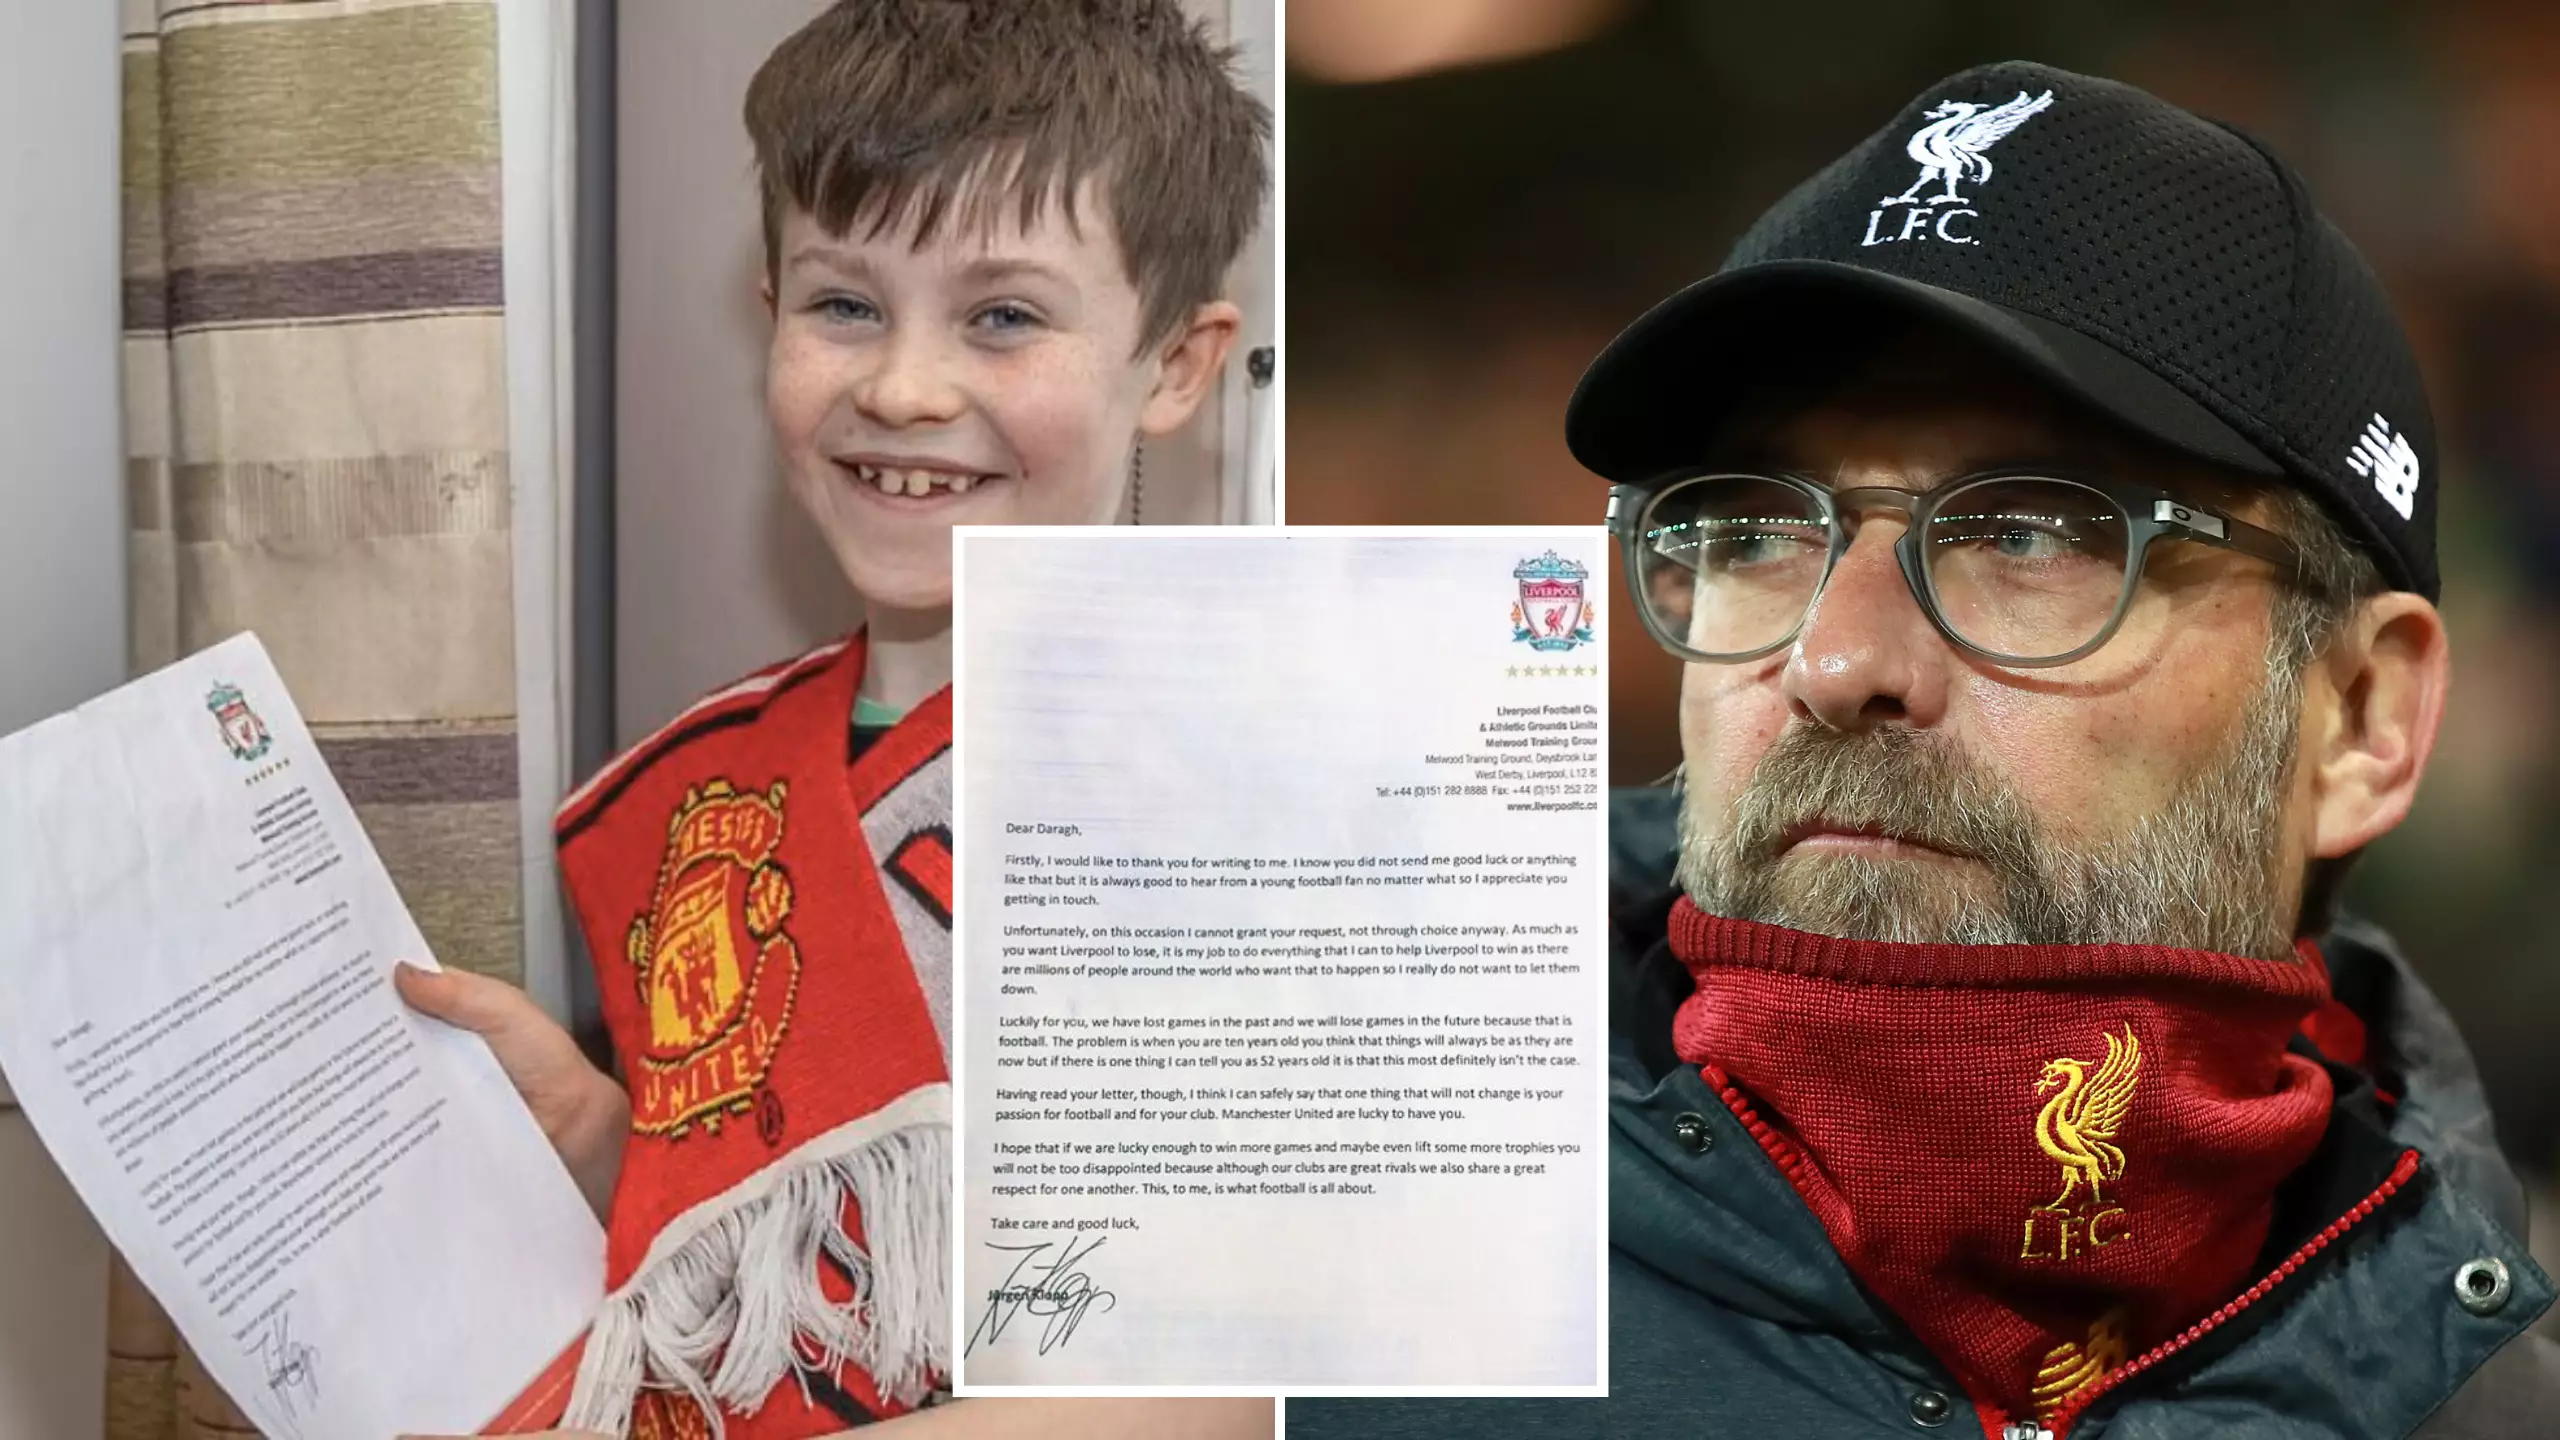 Jurgen Klopp Brilliantly Replies To Young Manchester United Fan's Letter